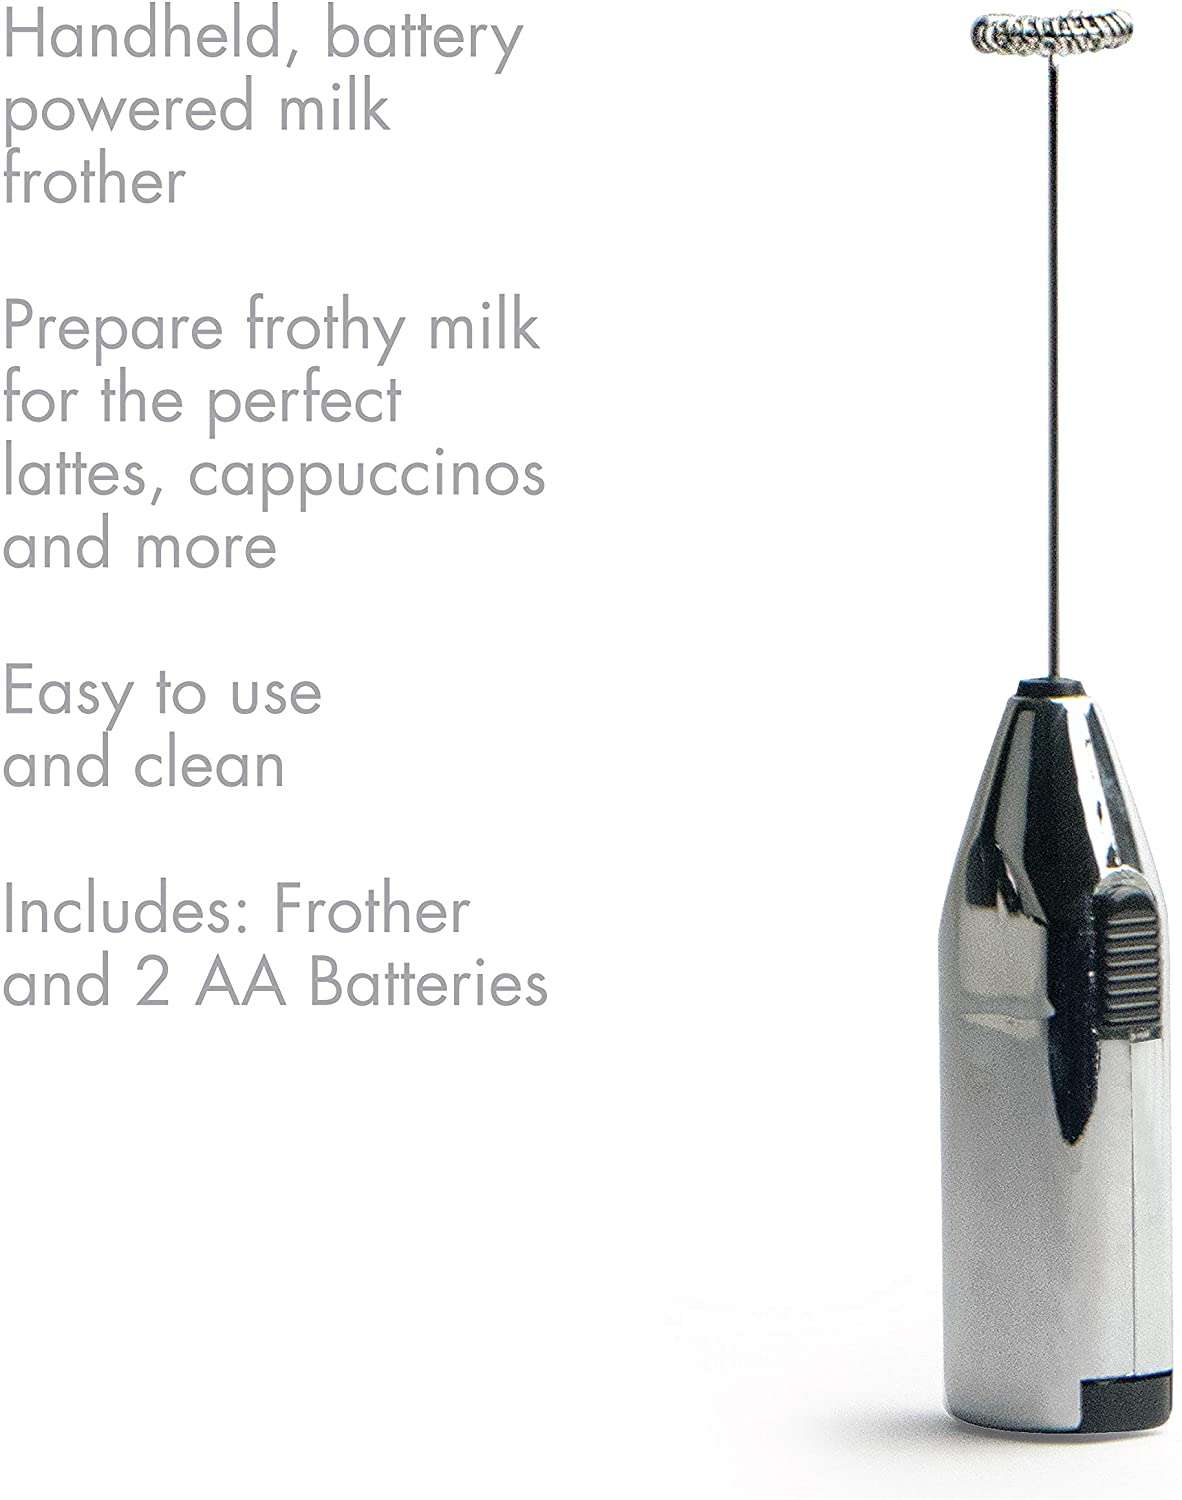 The Best Milk to Use in Electric Milk Frothers for Tea Lattes